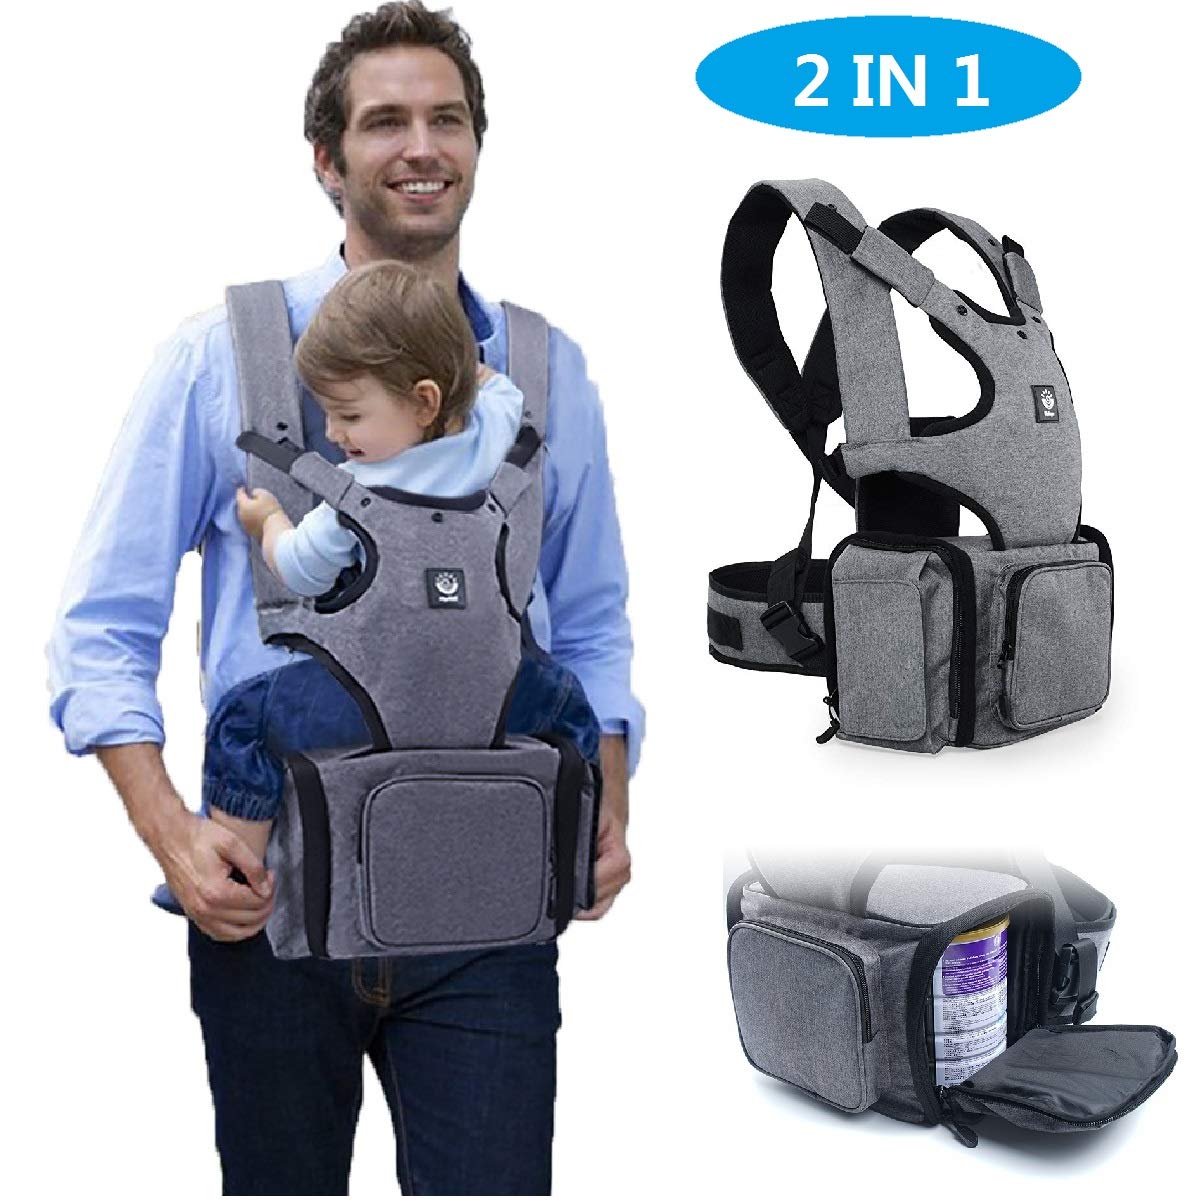 AUCOS Baby Carrier with Hip Seat - 2 in 1 Ergonomic Baby Sling Carrier and Dipers Bag Backpack Carrier